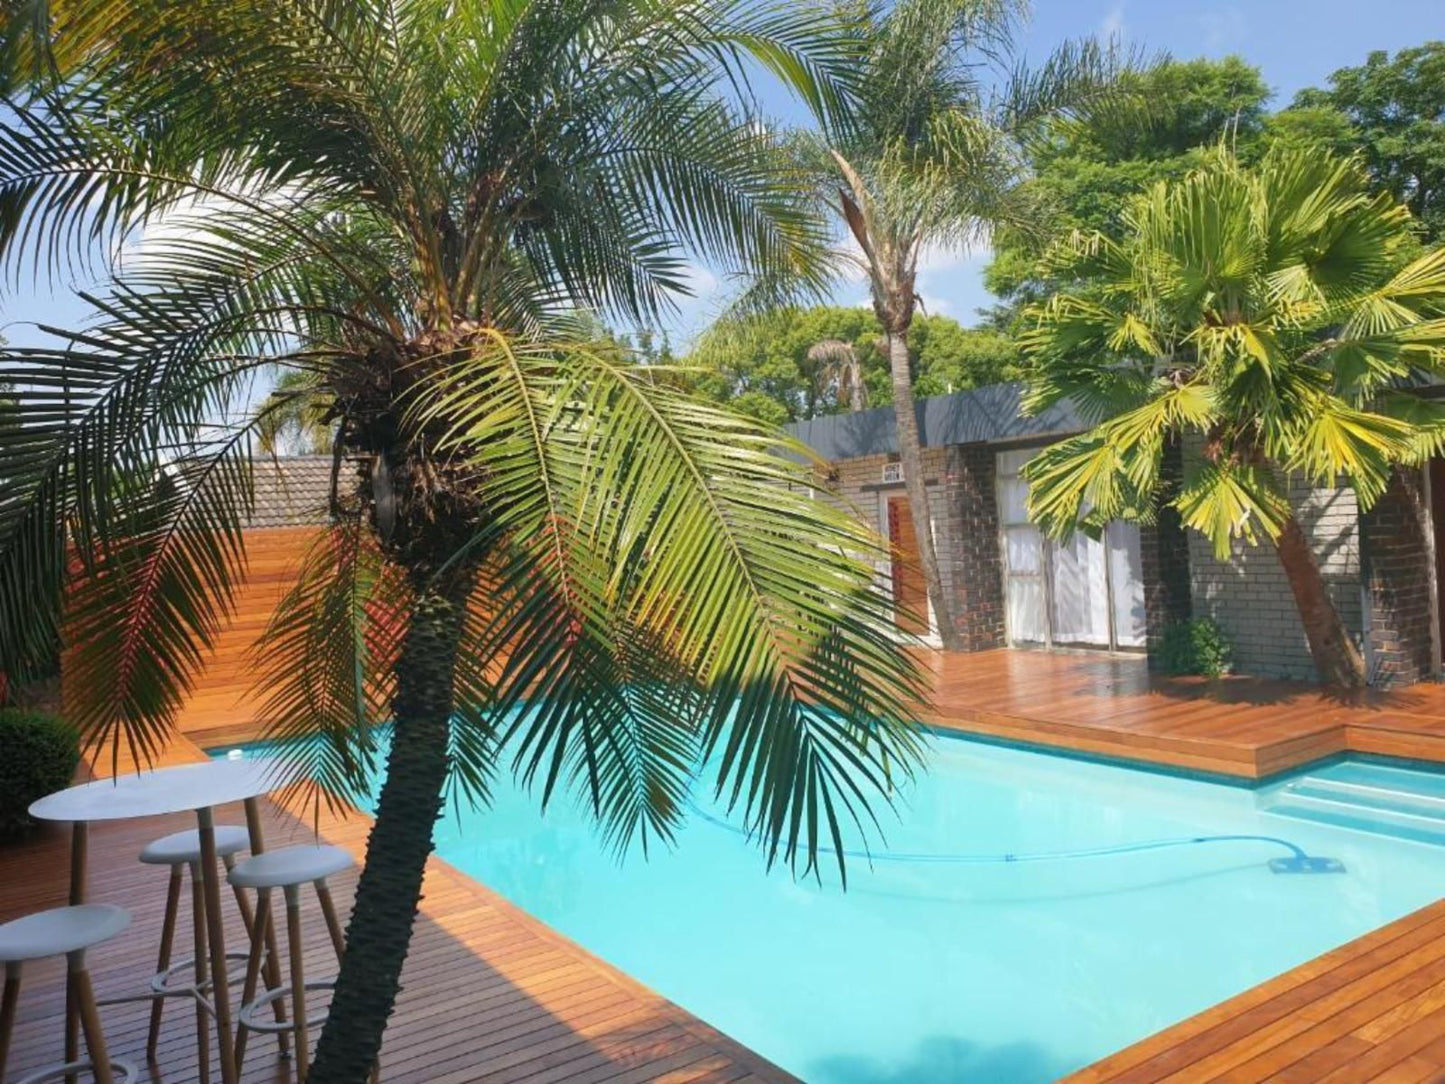 Fm Guest Lodge Randpark Ridge Johannesburg Gauteng South Africa Complementary Colors, Palm Tree, Plant, Nature, Wood, Swimming Pool